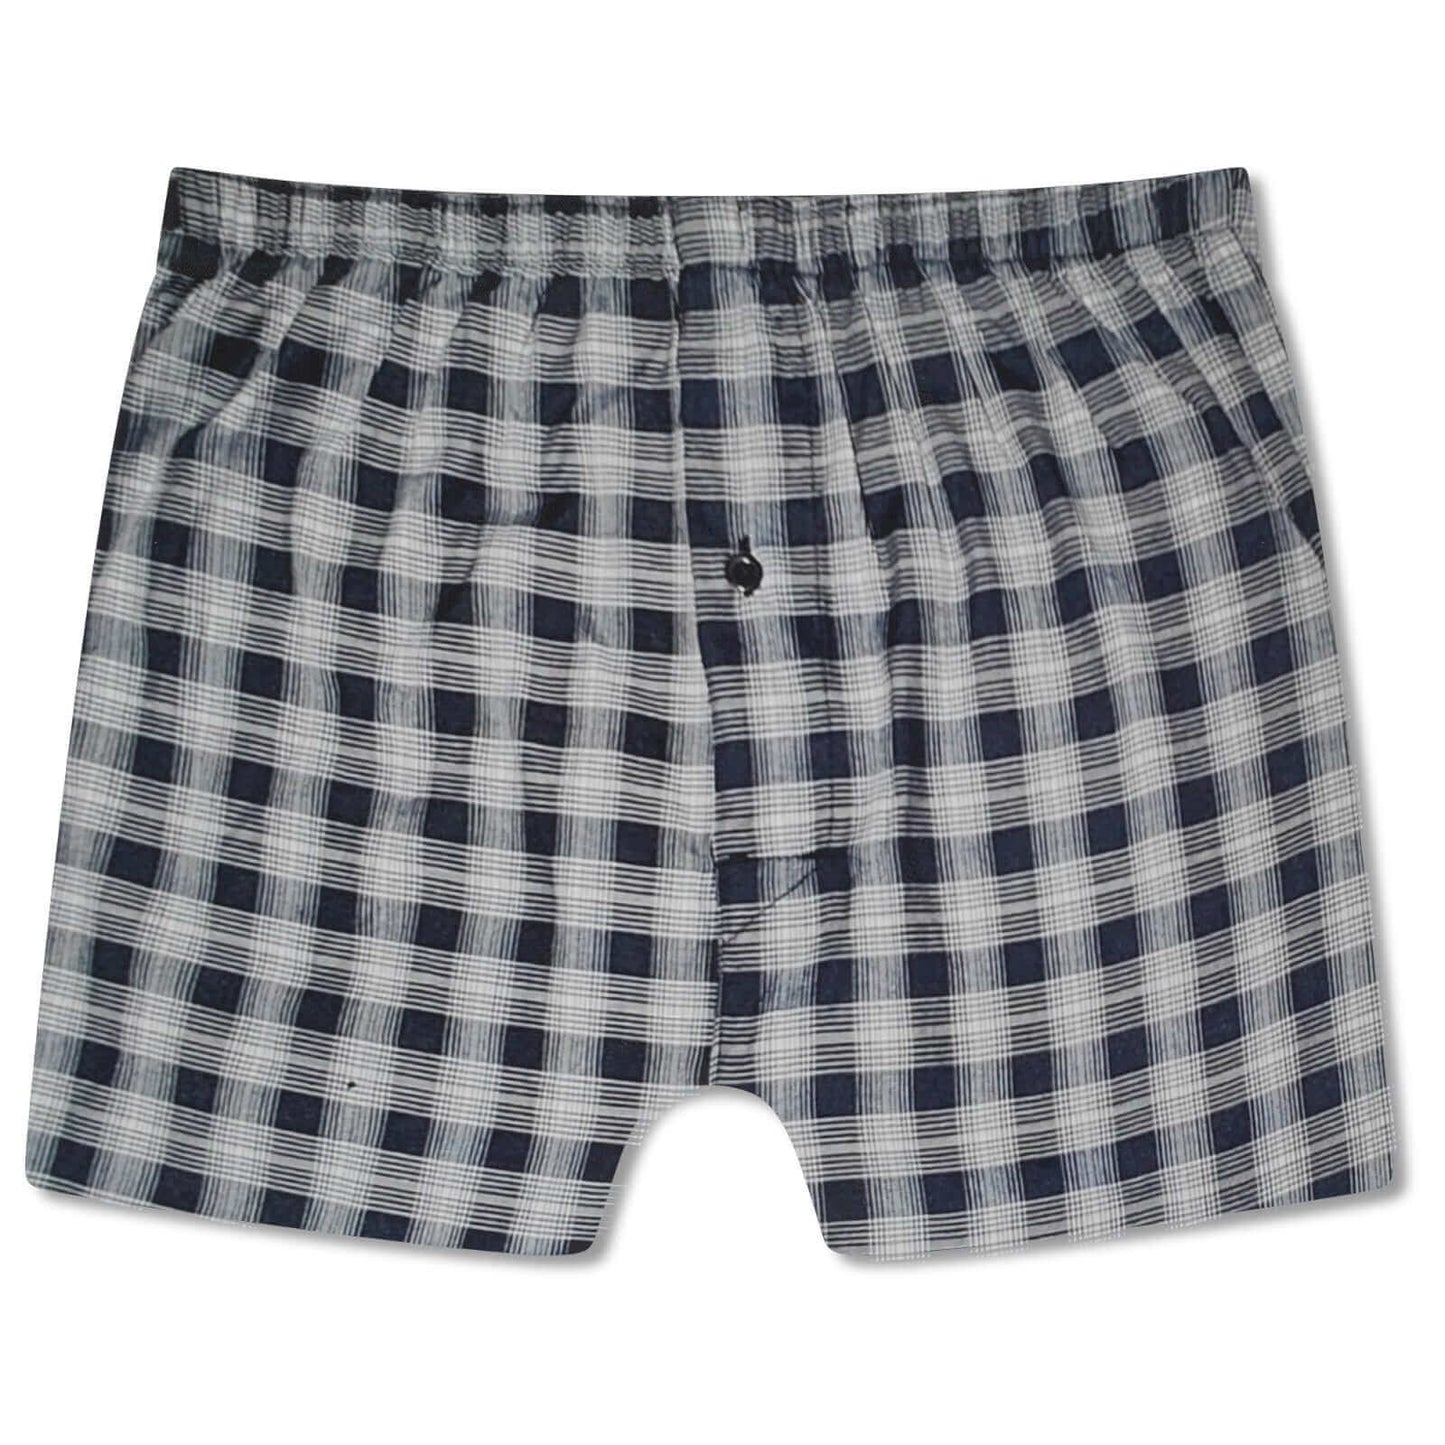 Pack Of 6 Men's Woven Boxers, Loose Fit Boxershorts, Comfort Waistband Underwear (MB01). Buy now for £8.00. A Boxer Shorts by Sock Stack. black, blue, boxer shorts, check, classic boxers, comfortable, cotton, cotton blend, elastic, grey, large, marl grey,